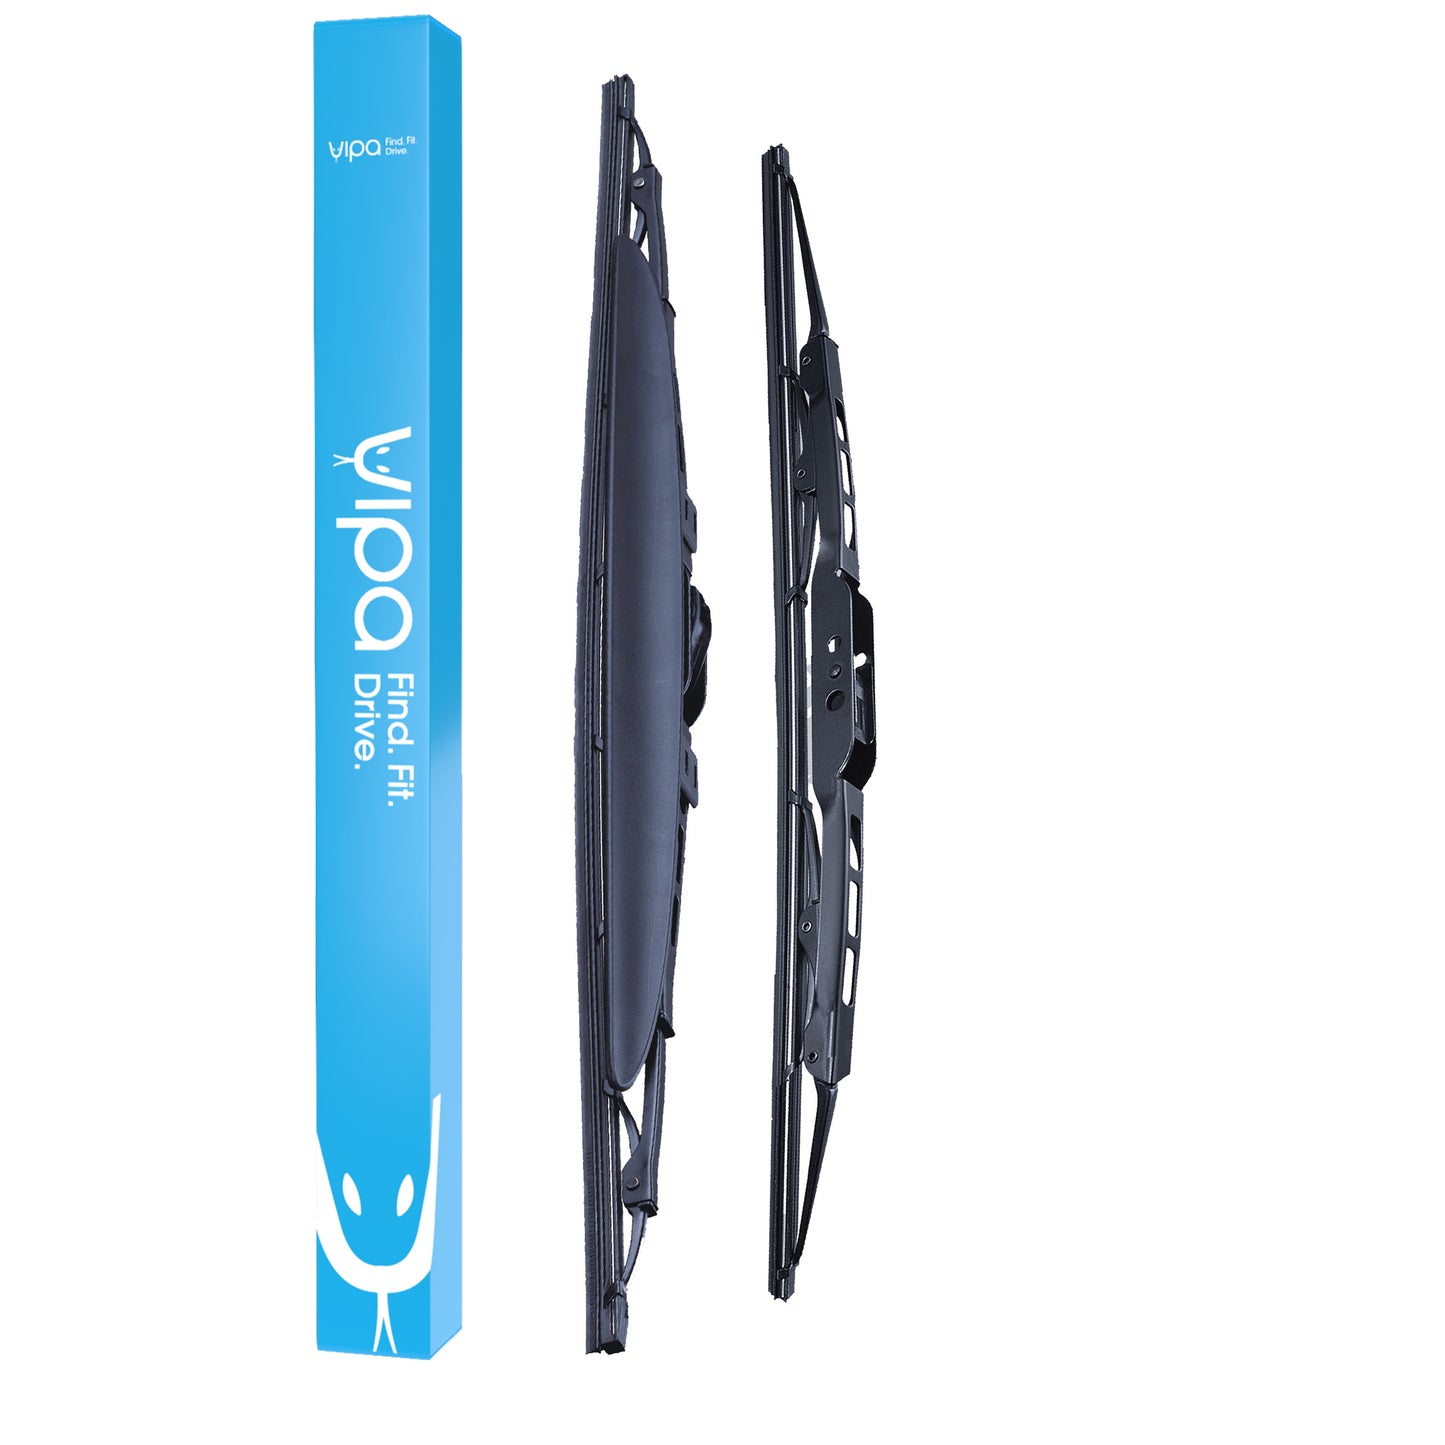 VAUXHALL VIVARO Chassis Cab Apr 2003 to May 2015 Wiper Blade Kit